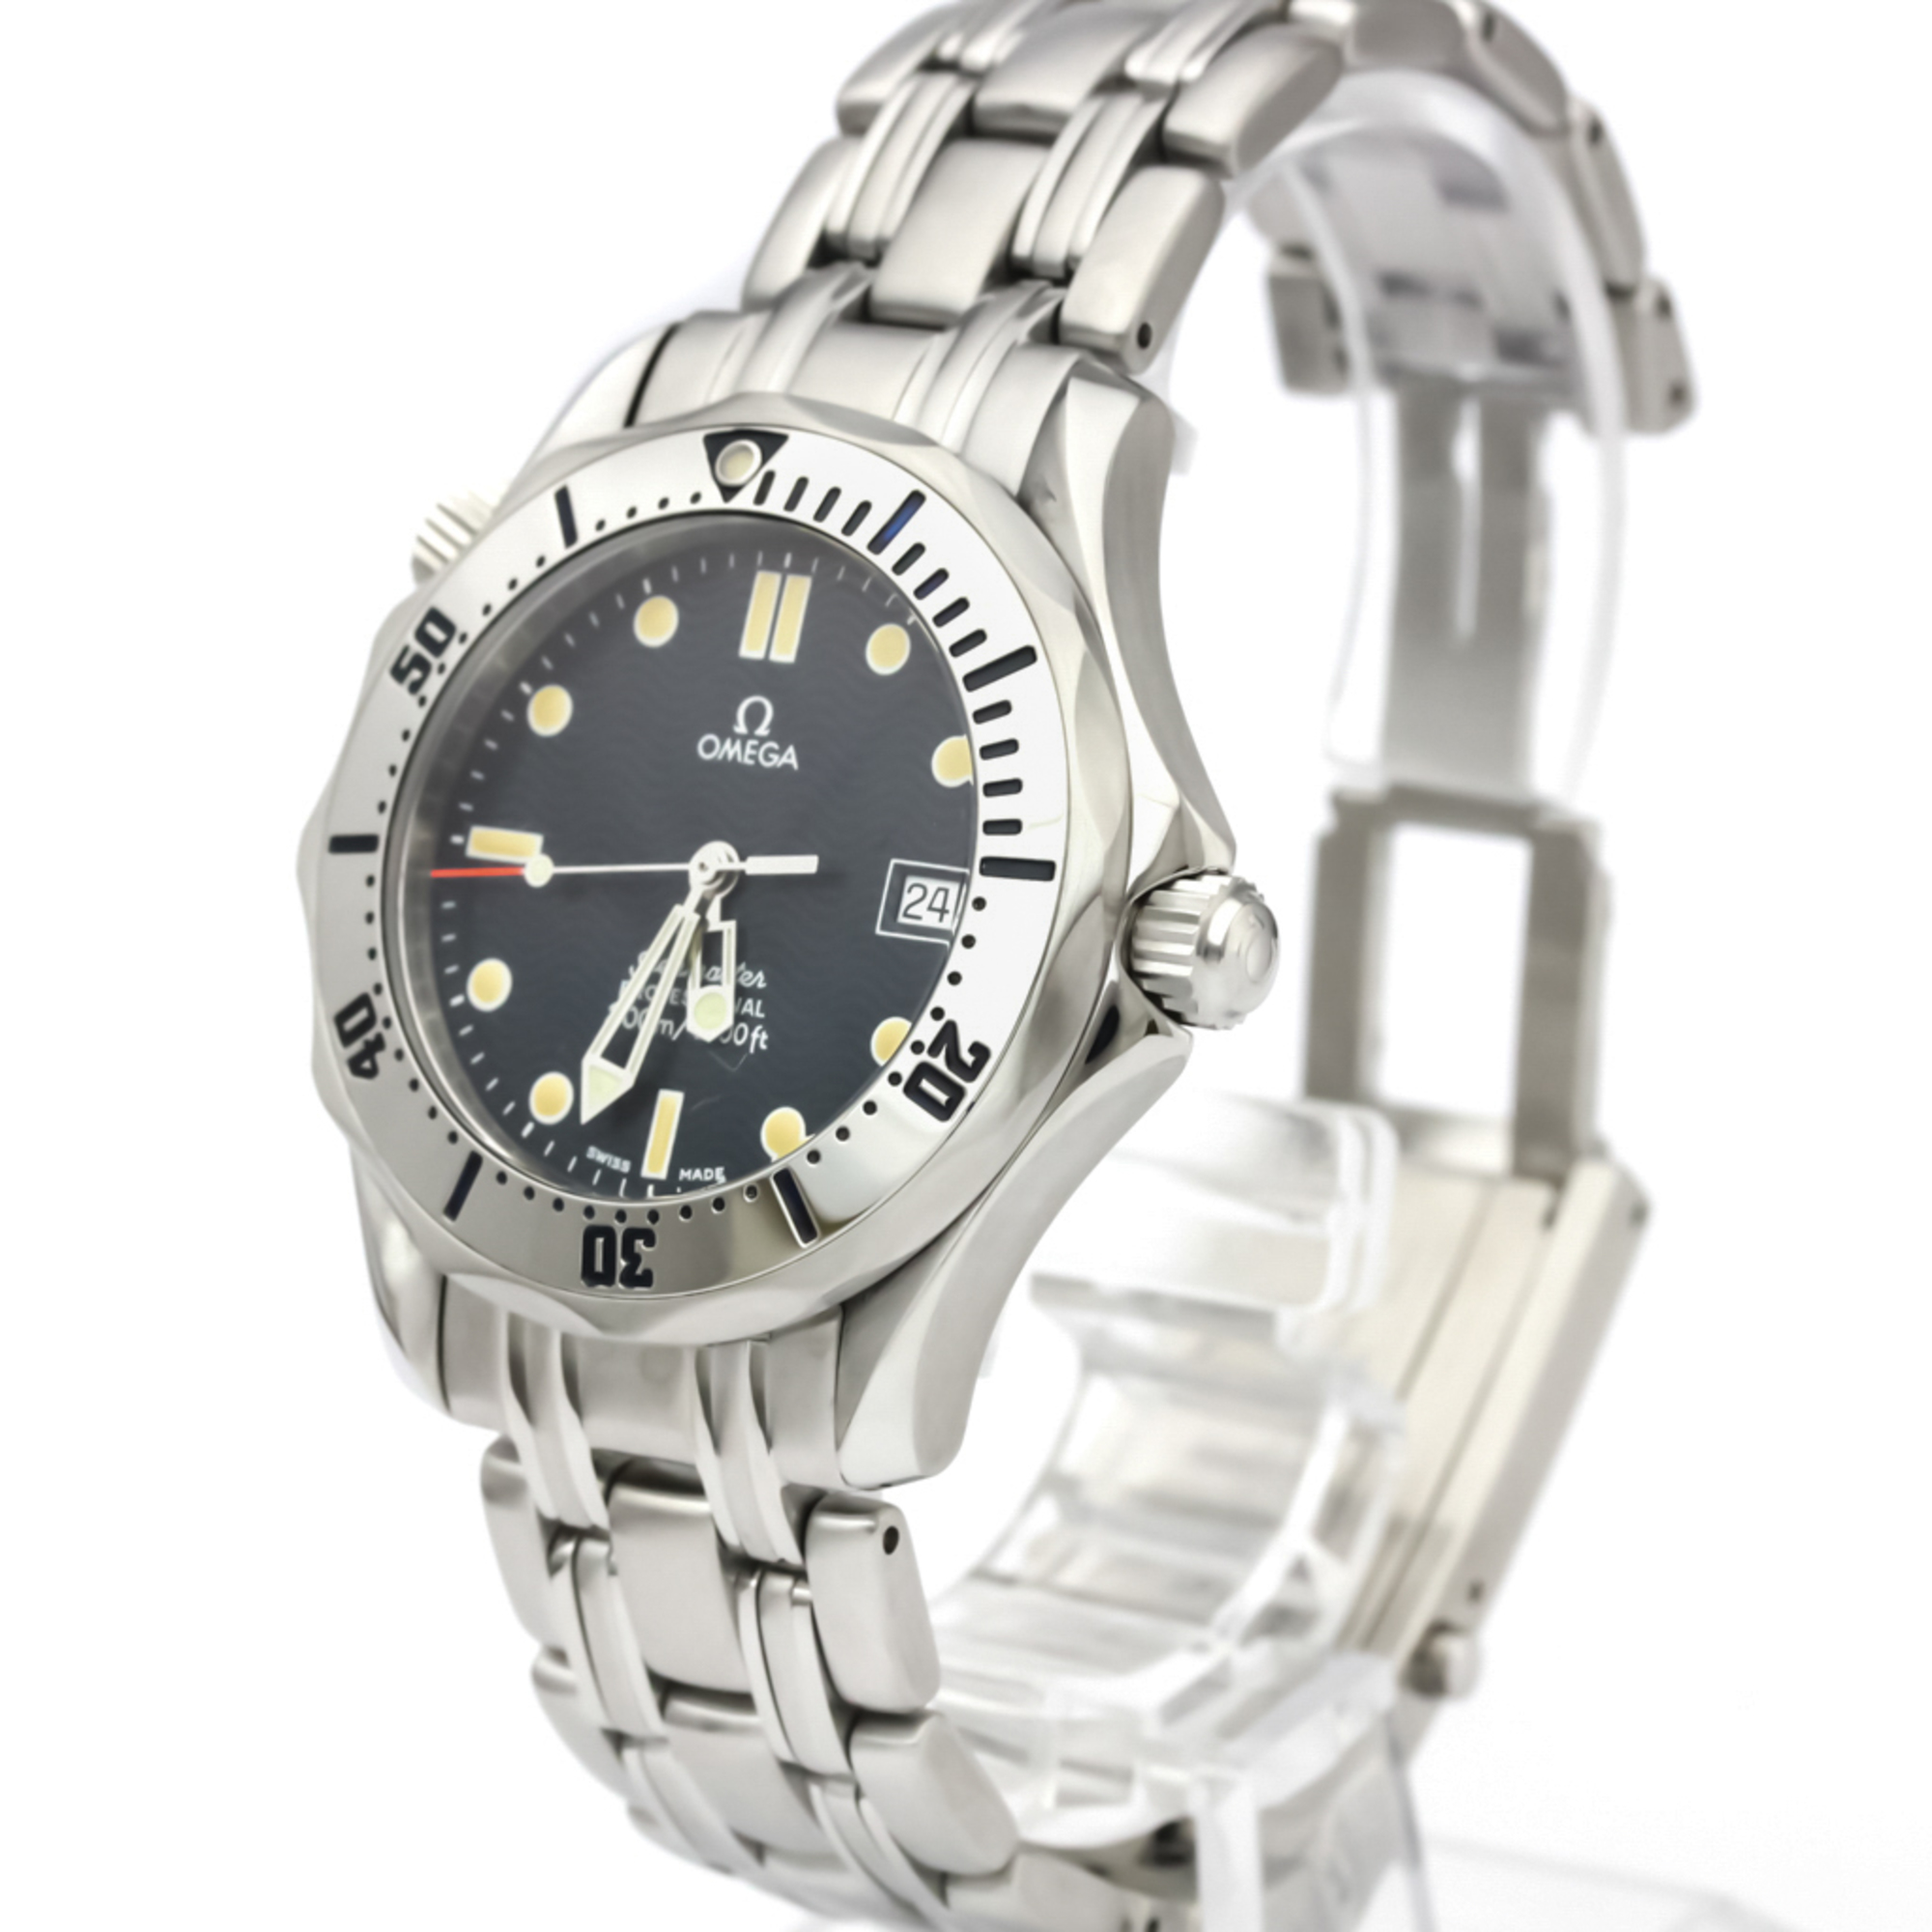 OMEGA Seamaster Professional 300M Steel Mid Size Watch 2562.80